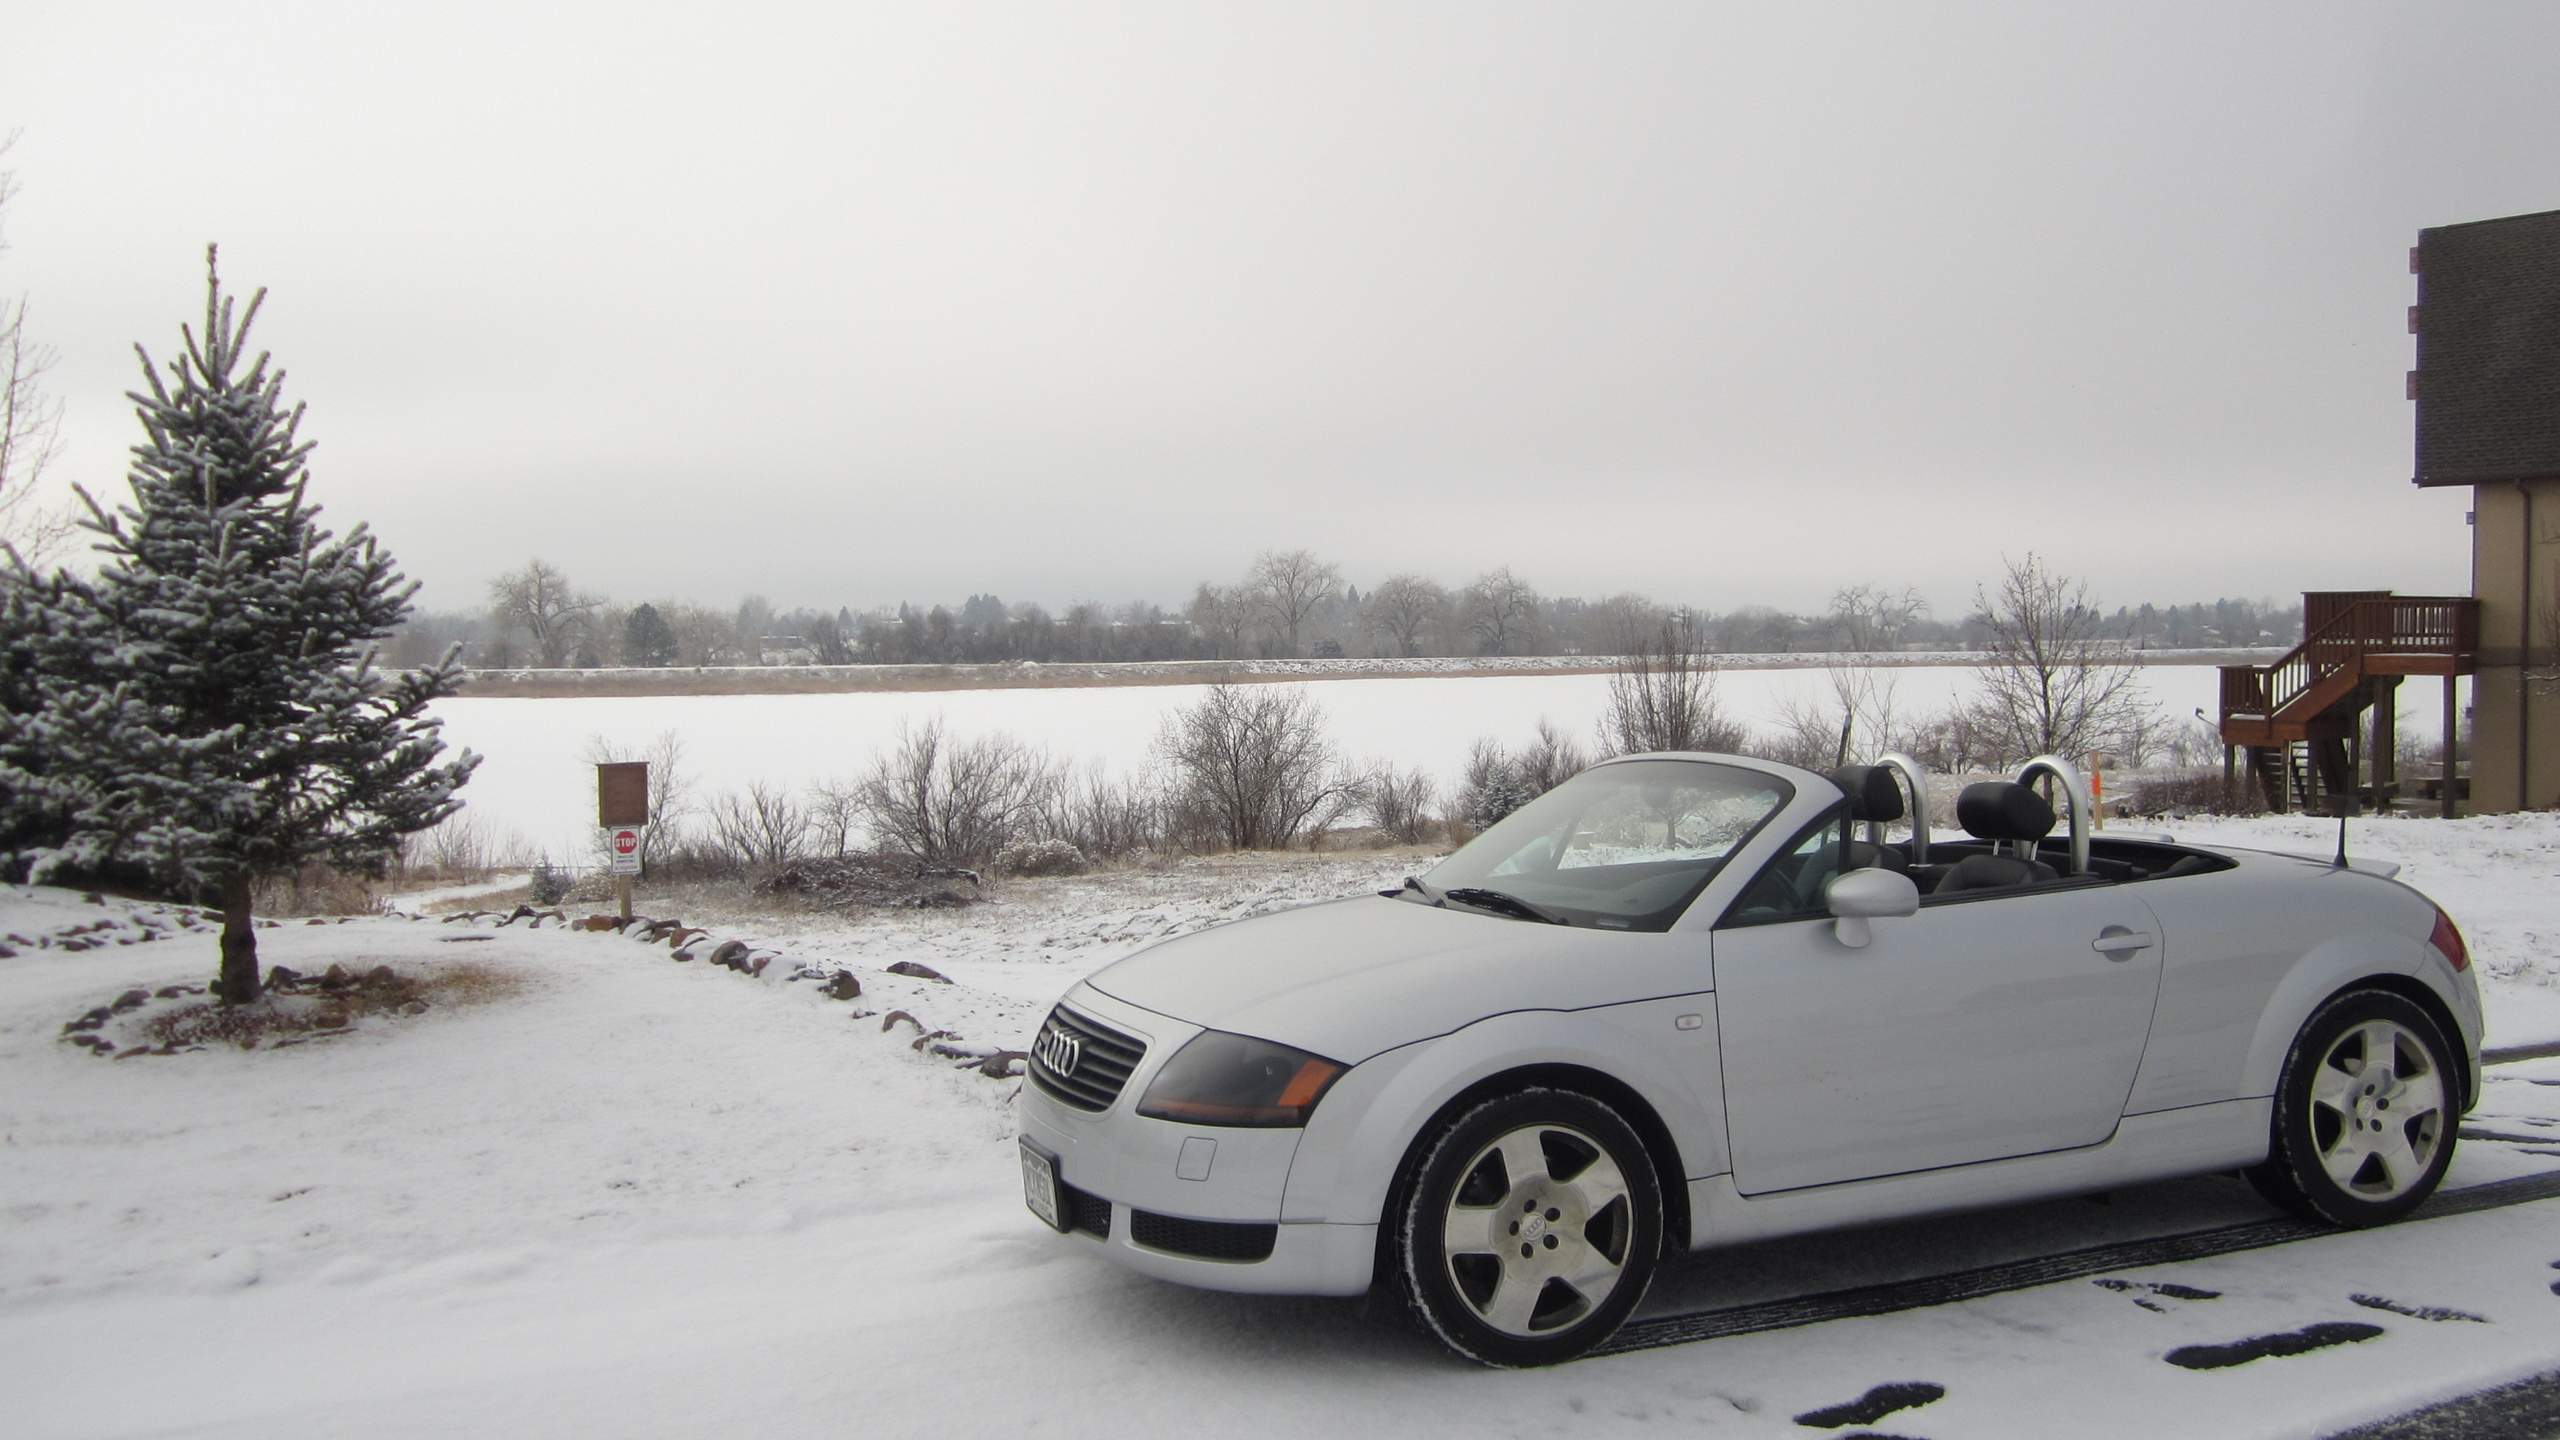 Driving an Audi TT in winter is much warmer than a motorcycle, especially with heated seats.